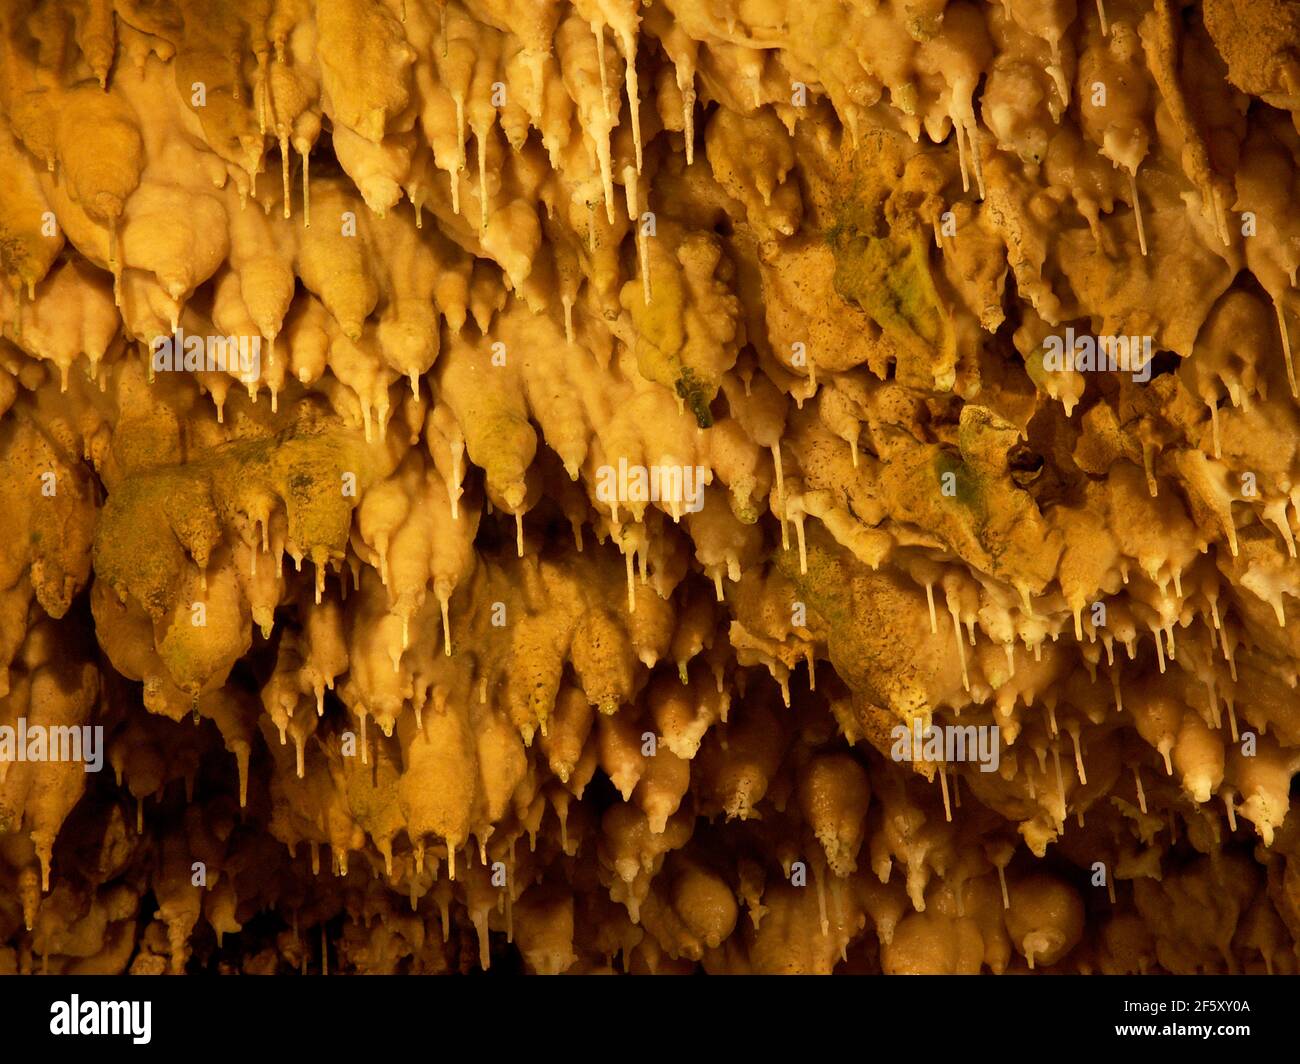 Stalactites in the Charlotten Cave (Charlottenhöhle) near Hürben (part of Gingen) on the Swabian Alps, Baden-Württemberg, Germany Stock Photo